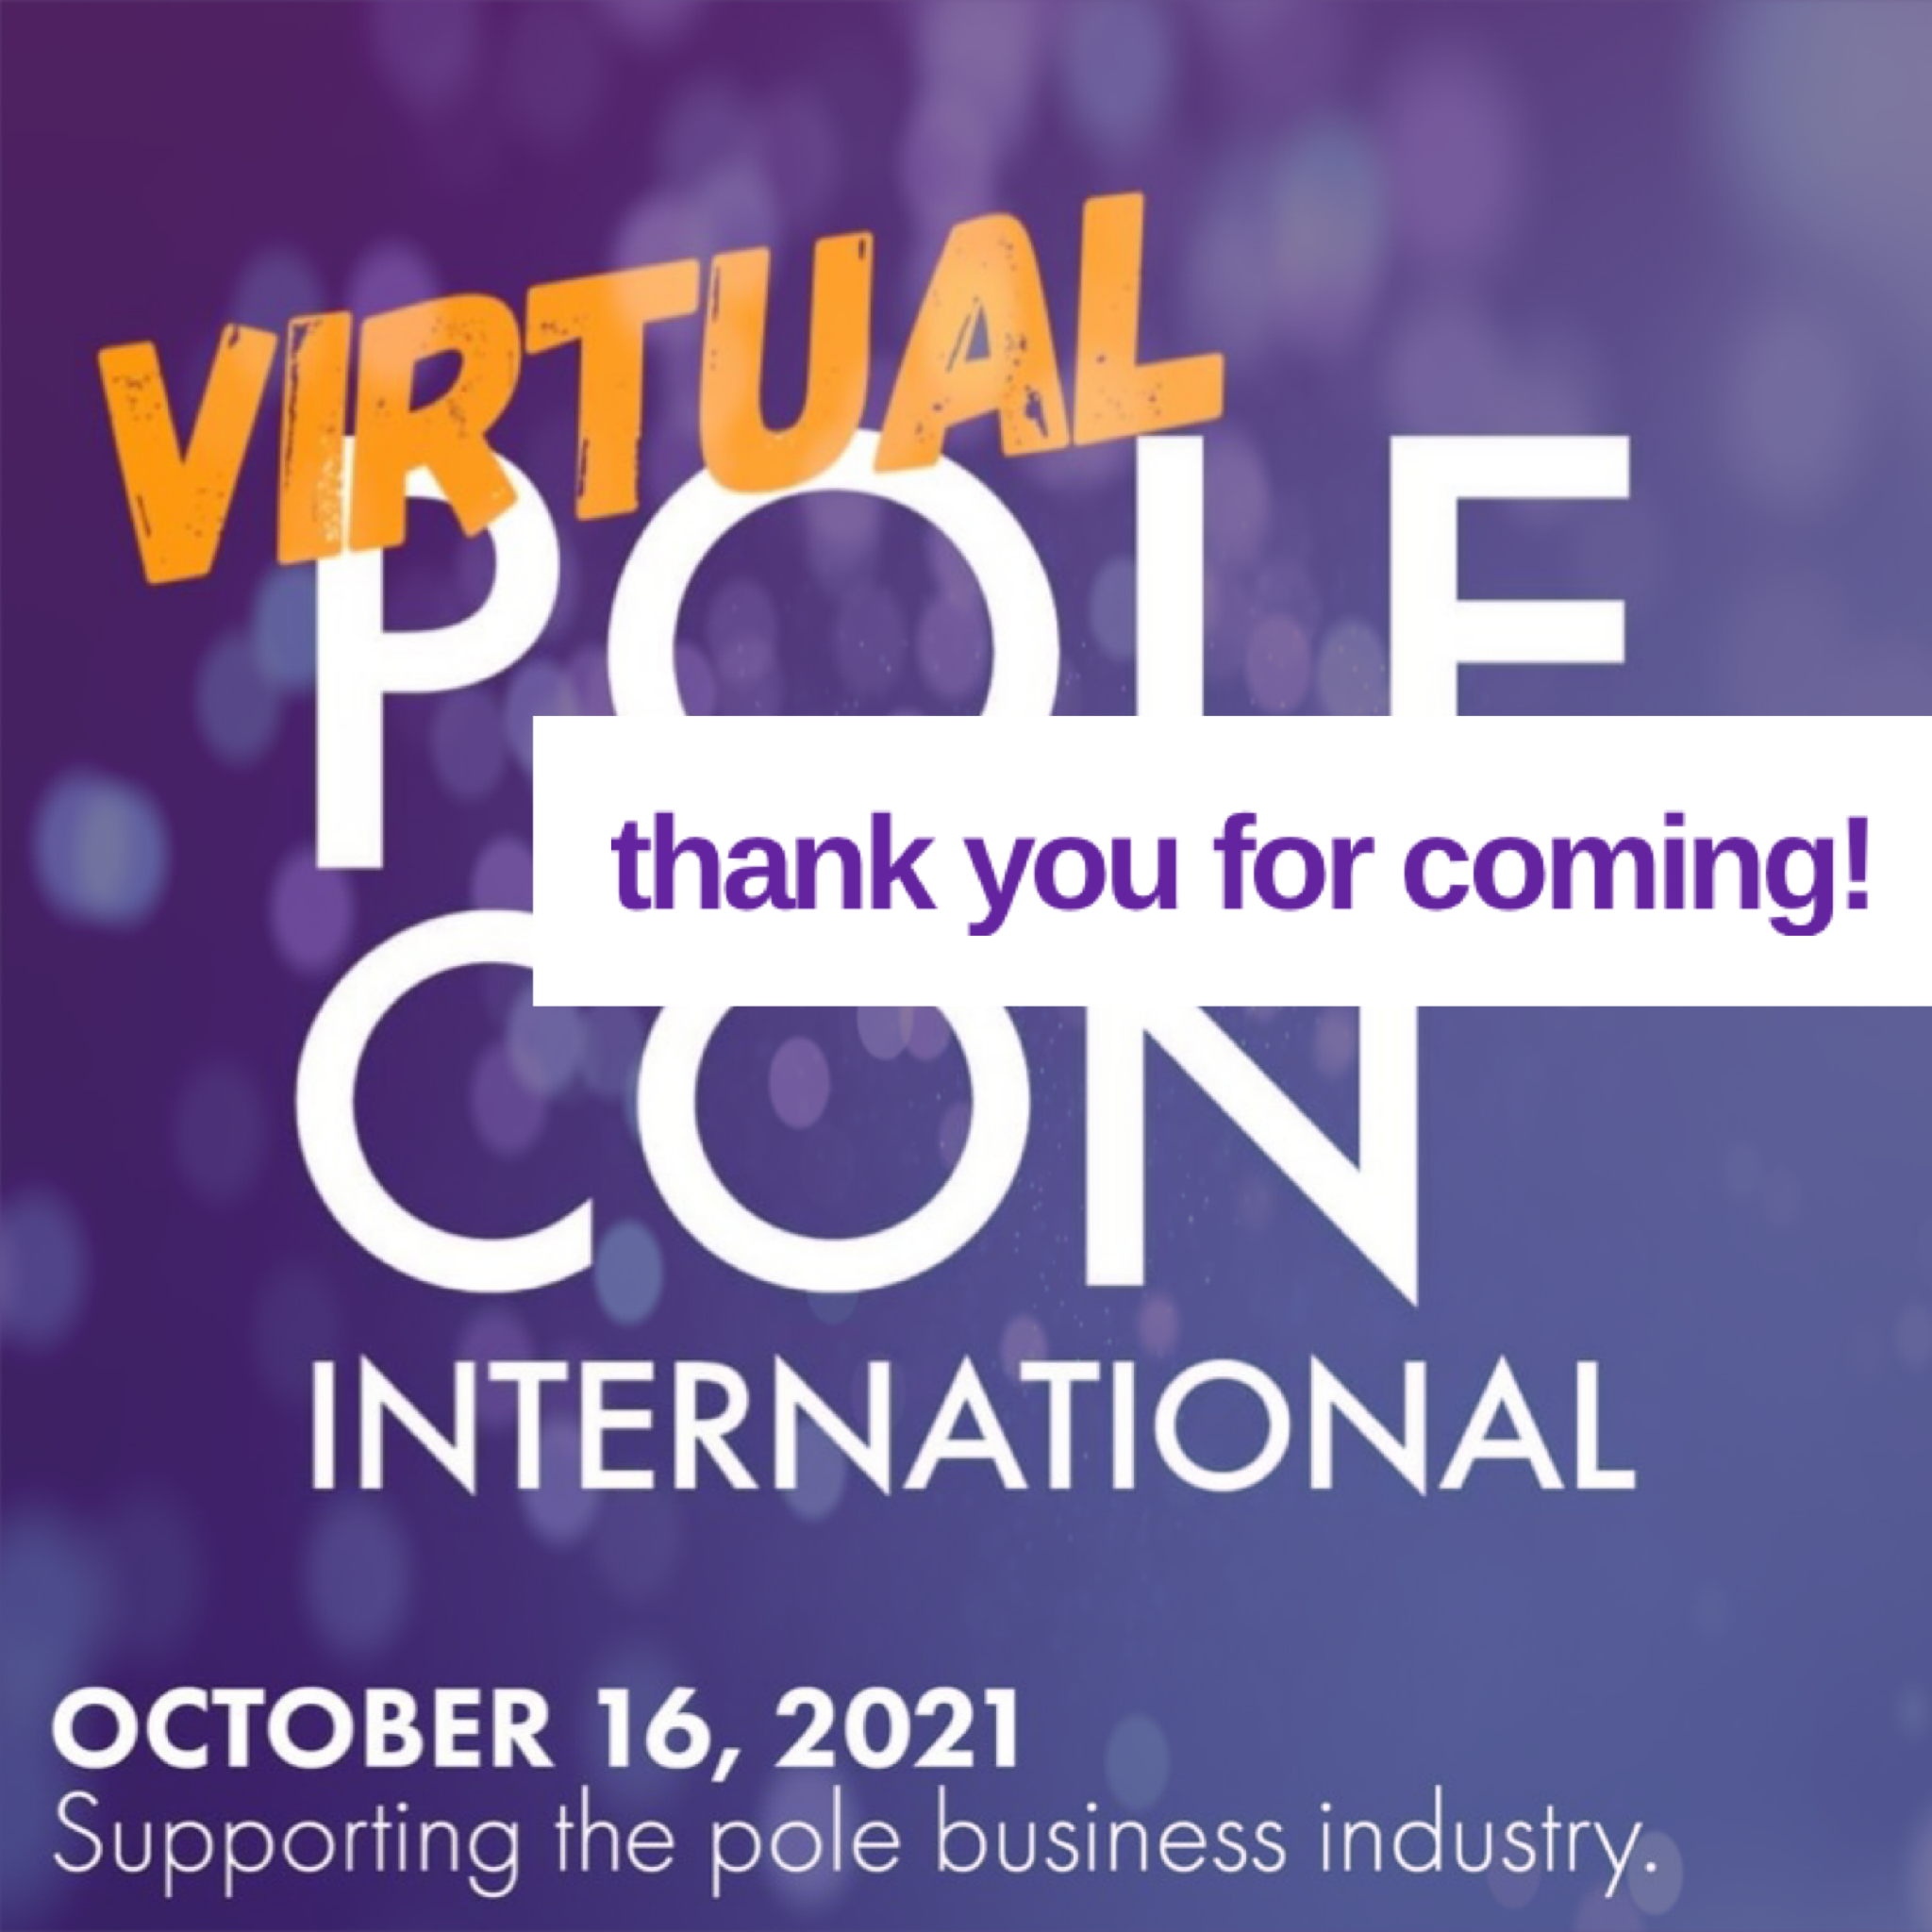 Virtual PoleCon logo with text "Thank you for coming!" October 2021